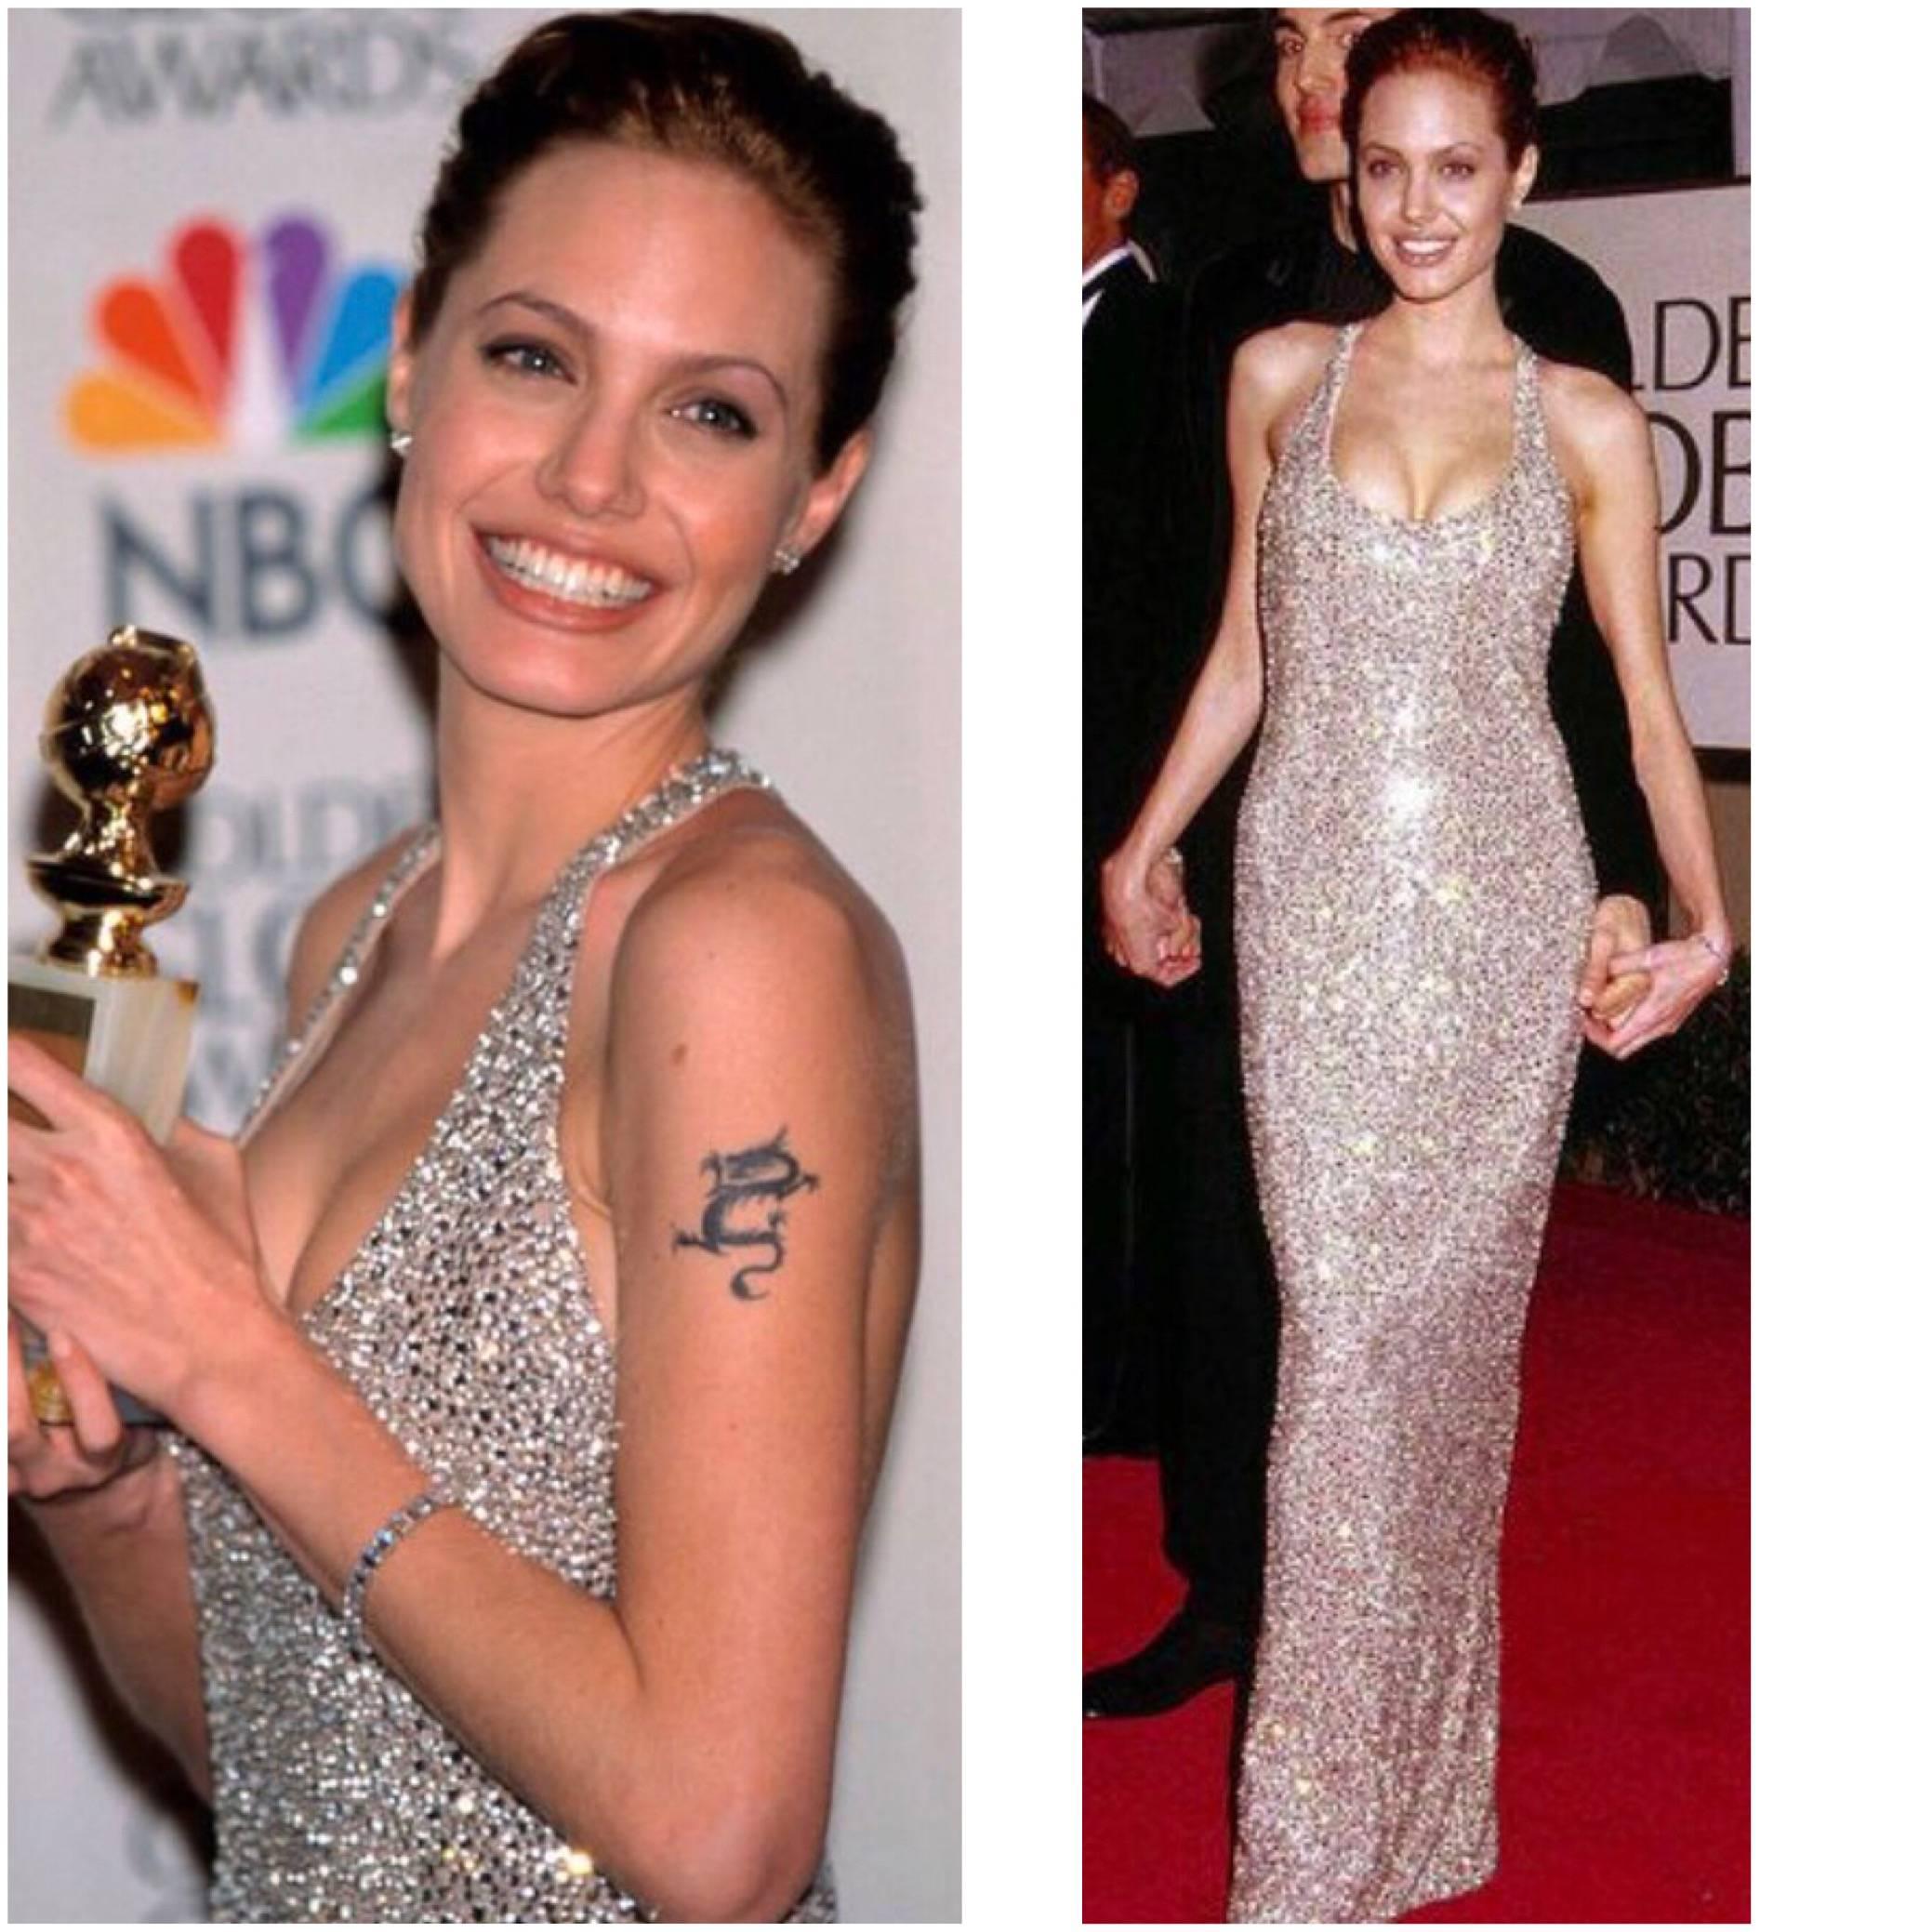 Featuring the same RANDOLPH DUKE evening dress (in a gunmetal color) that Angelina Jolie wore when she accepted her Golden Globe in 1999 when she won for her role in, "GIA"! Words cannot even begin to describe how insanely gorgeous this